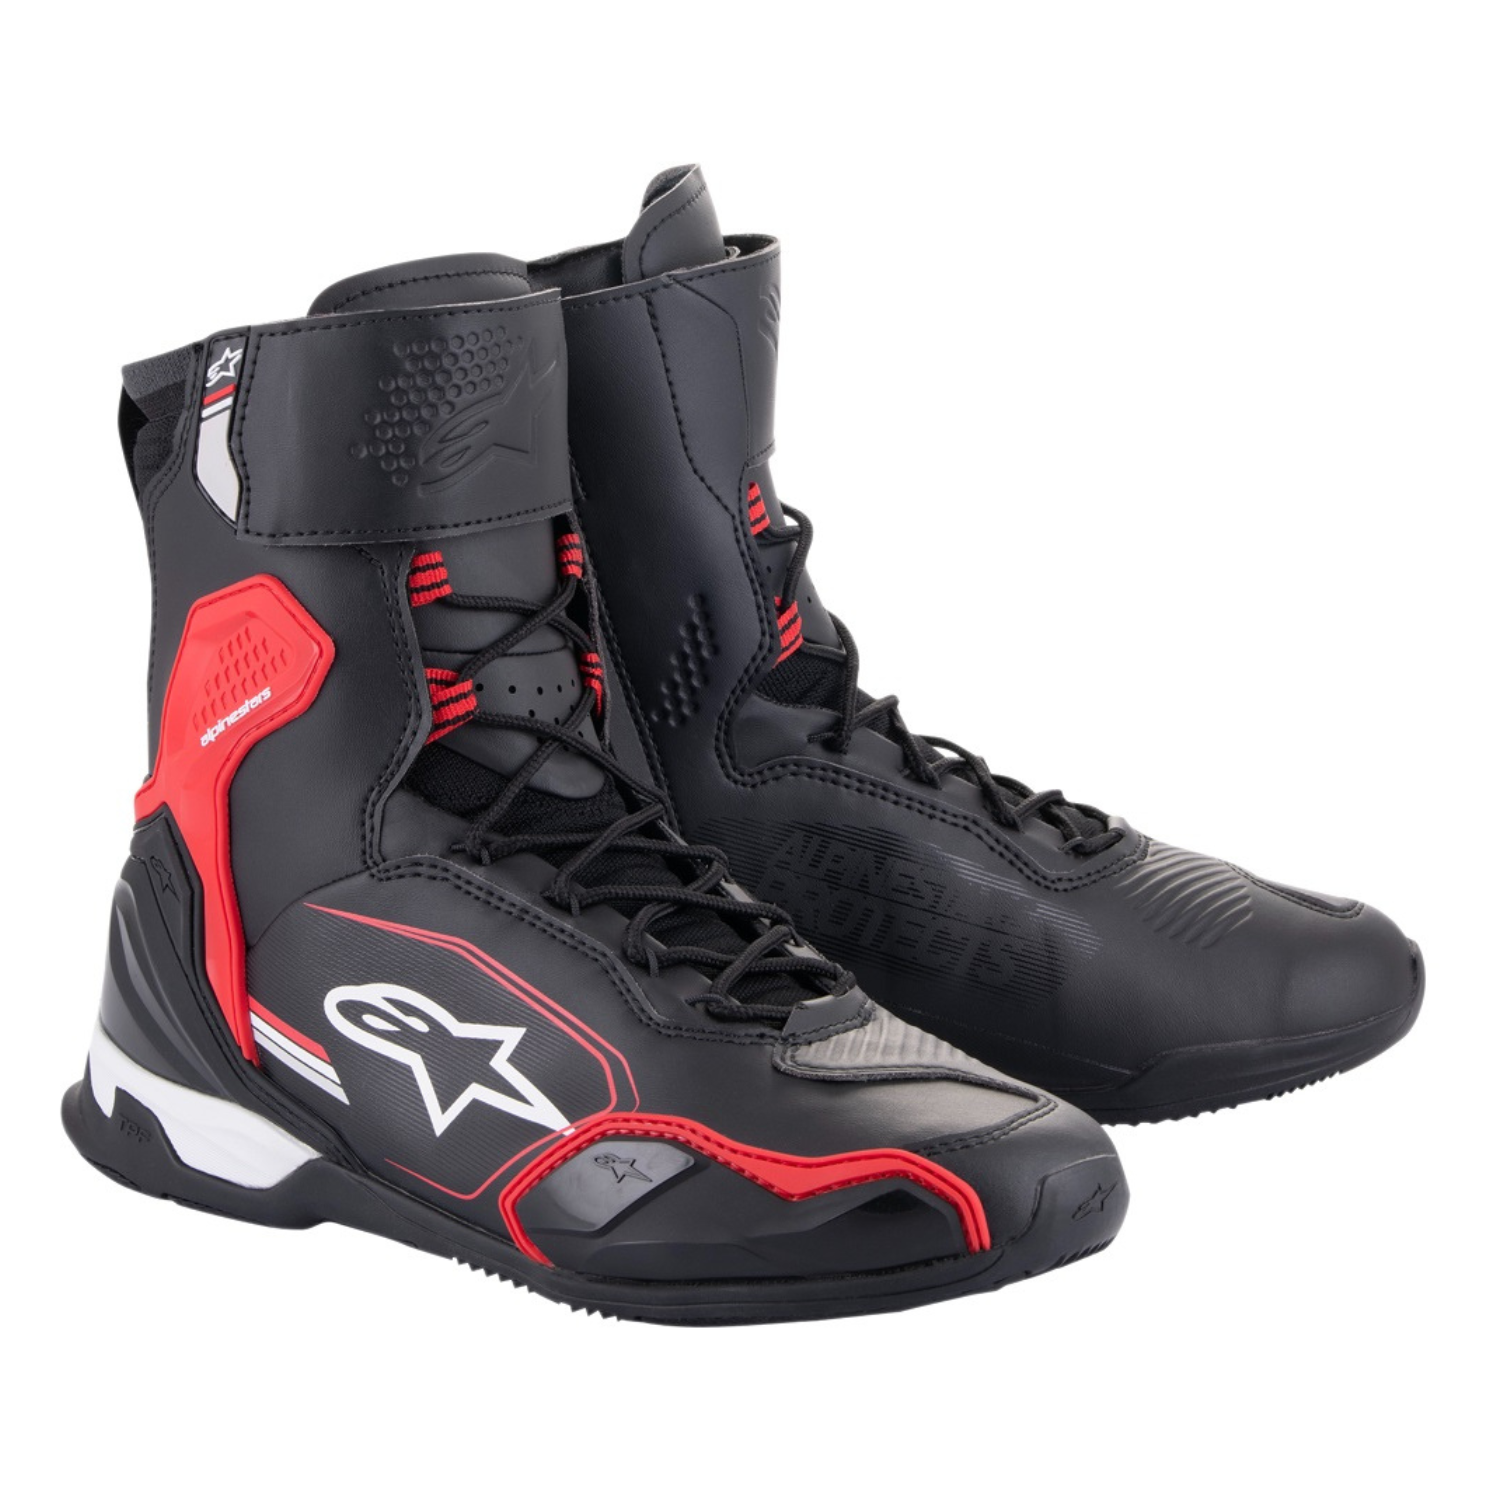 Image of Alpinestars Superfaster Shoes Black Bright Red White Talla US 6